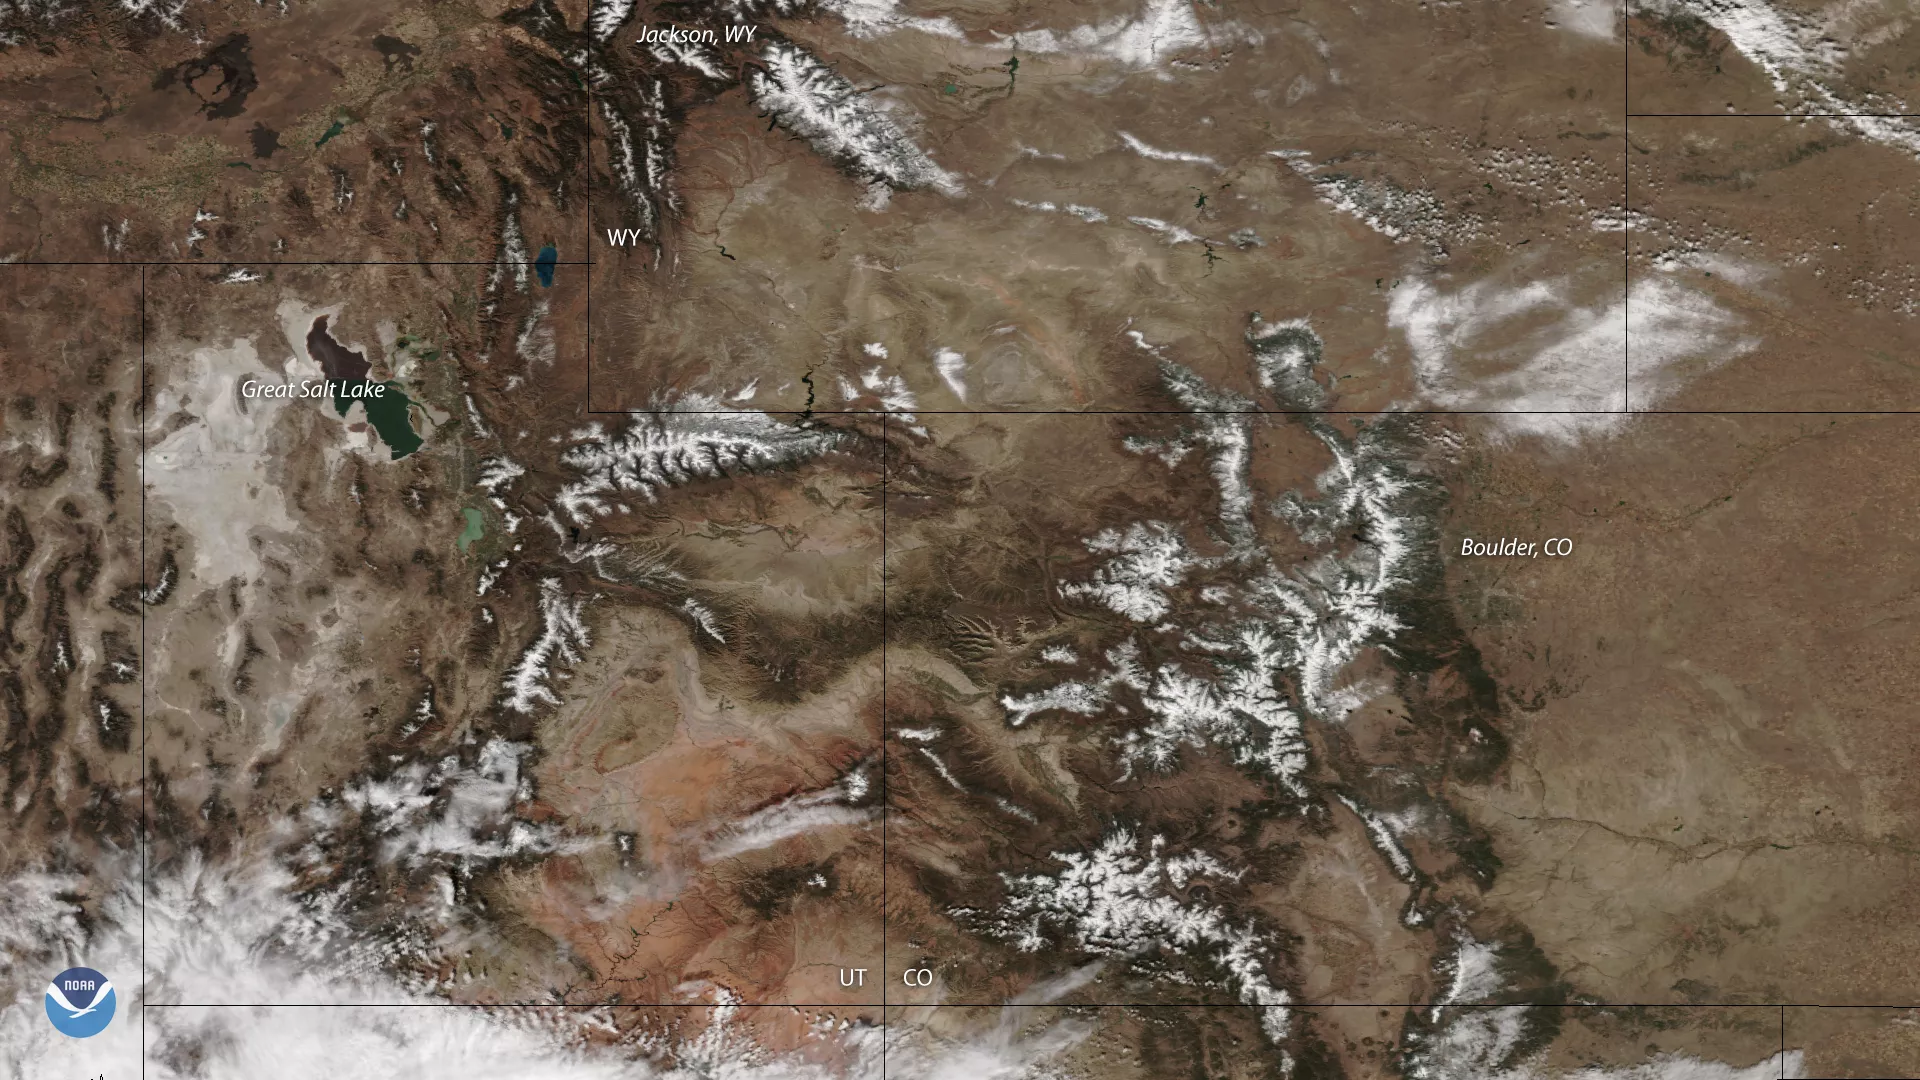 NOAA-20 imagery of the Rockies shows snow blanketing some areas on Oct. 16, 2018.